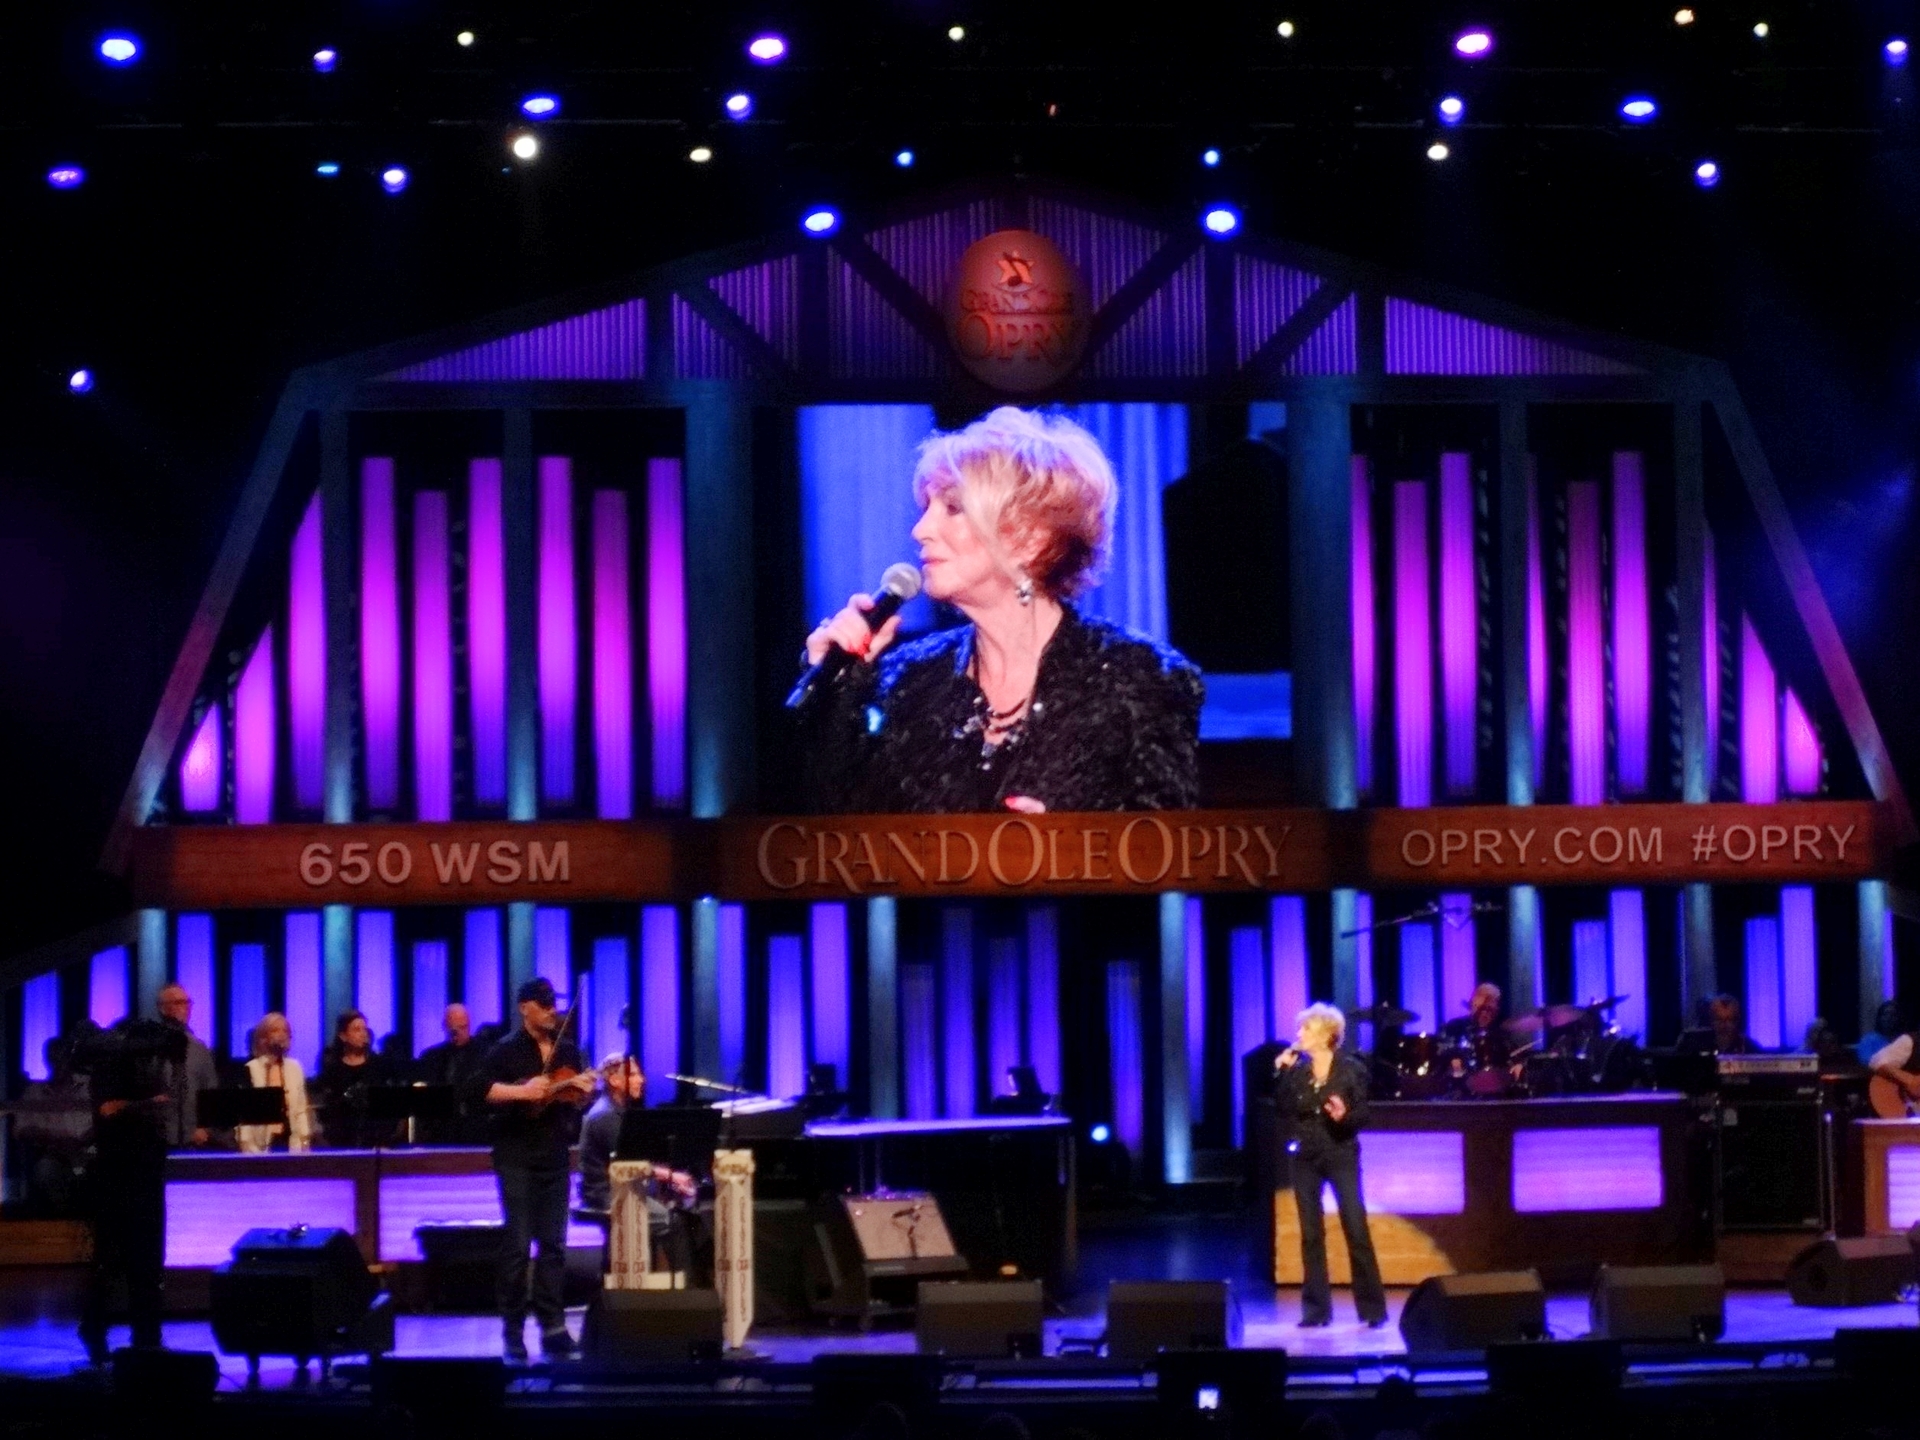 Strictly Country magazine Jeannie Seely on the Opry